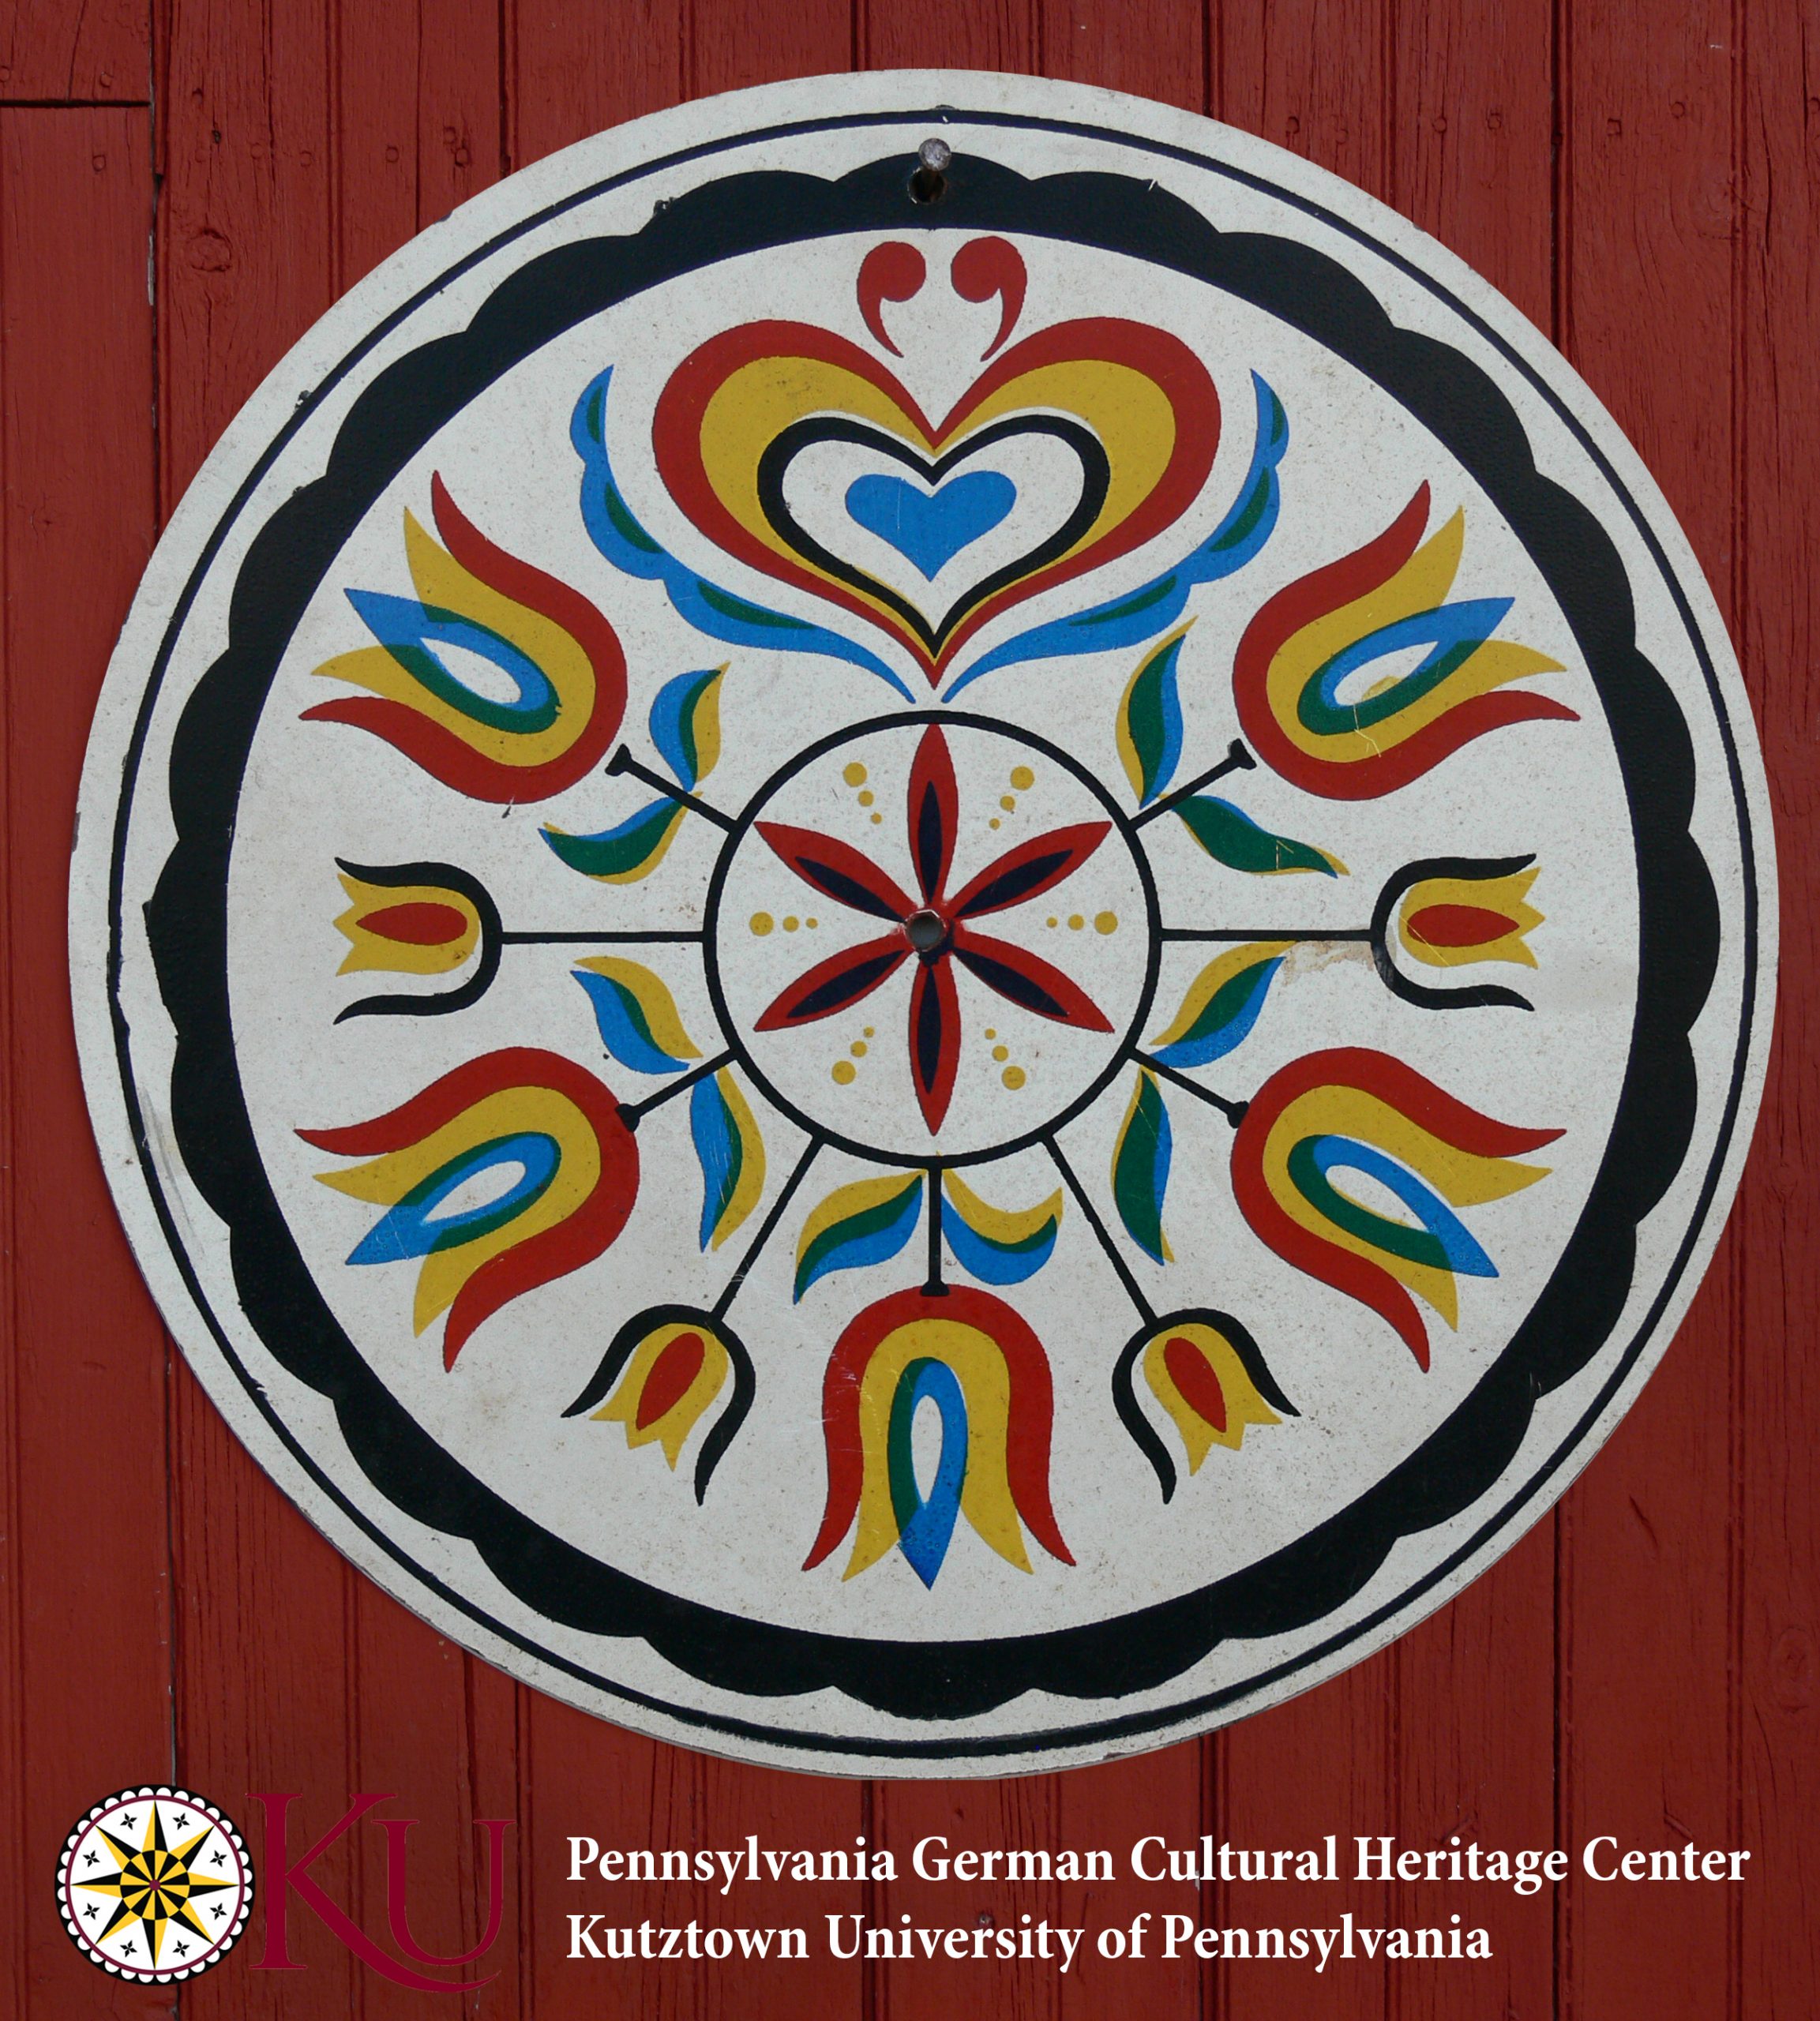 A center 6-pointed rosette in red and black is surrounded by nine stylized tulips emanating from the center. A stylized heart is at the top in the center. All of these designs are in red, yellow, blue, green, and black. The entire sign is encompassed by a black scalloped border.